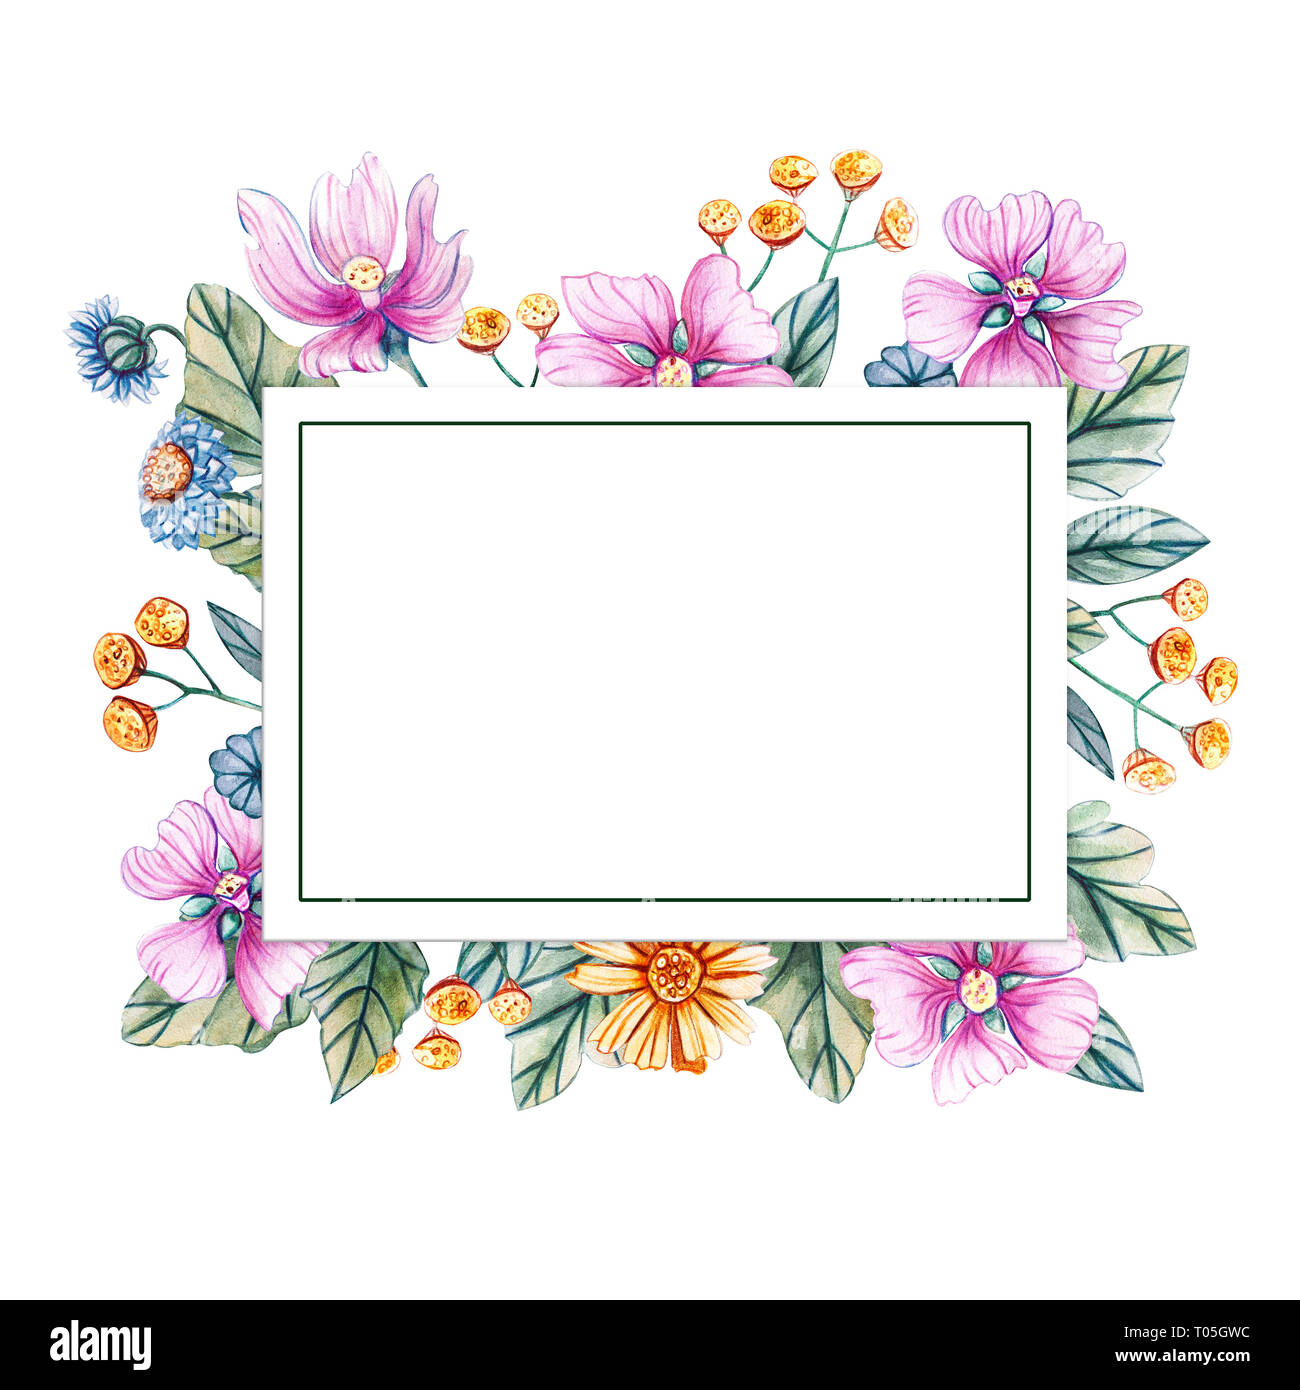 Corner border flower Cut Out Stock Images & Pictures - Alamy